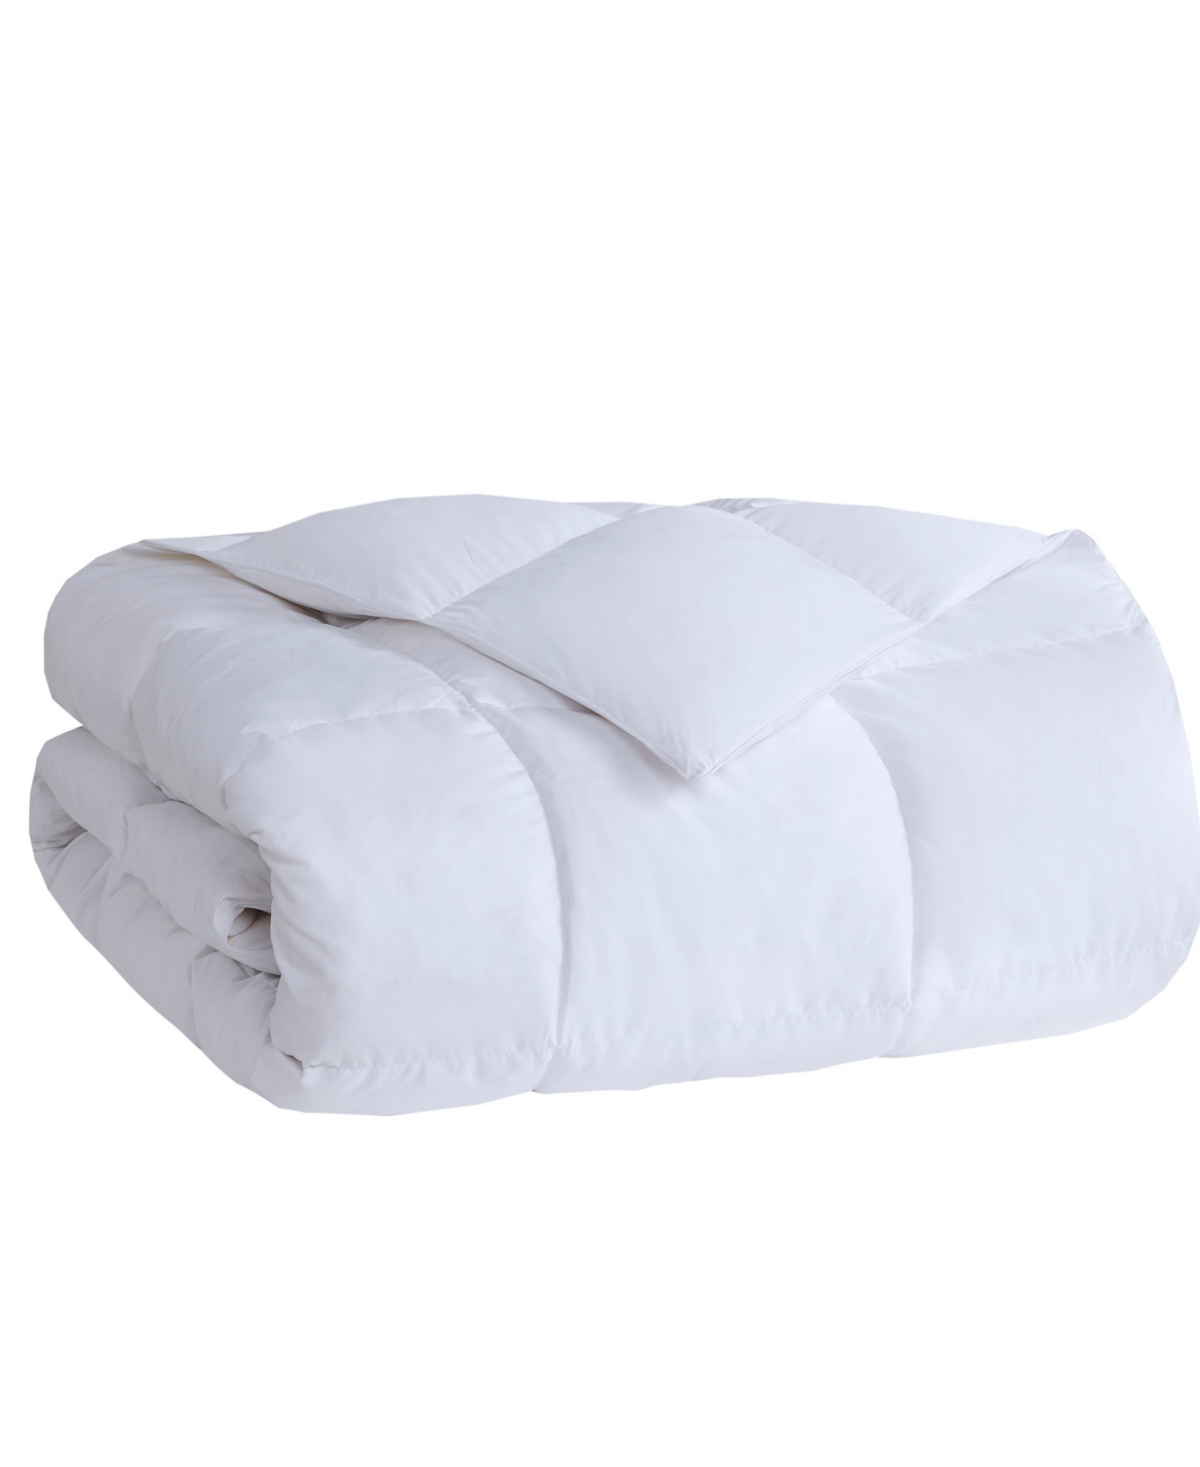 Sleep Philosophy Heavy Warmth Goose Feather & Goose Down Filling Comforter,, Full/queen In White